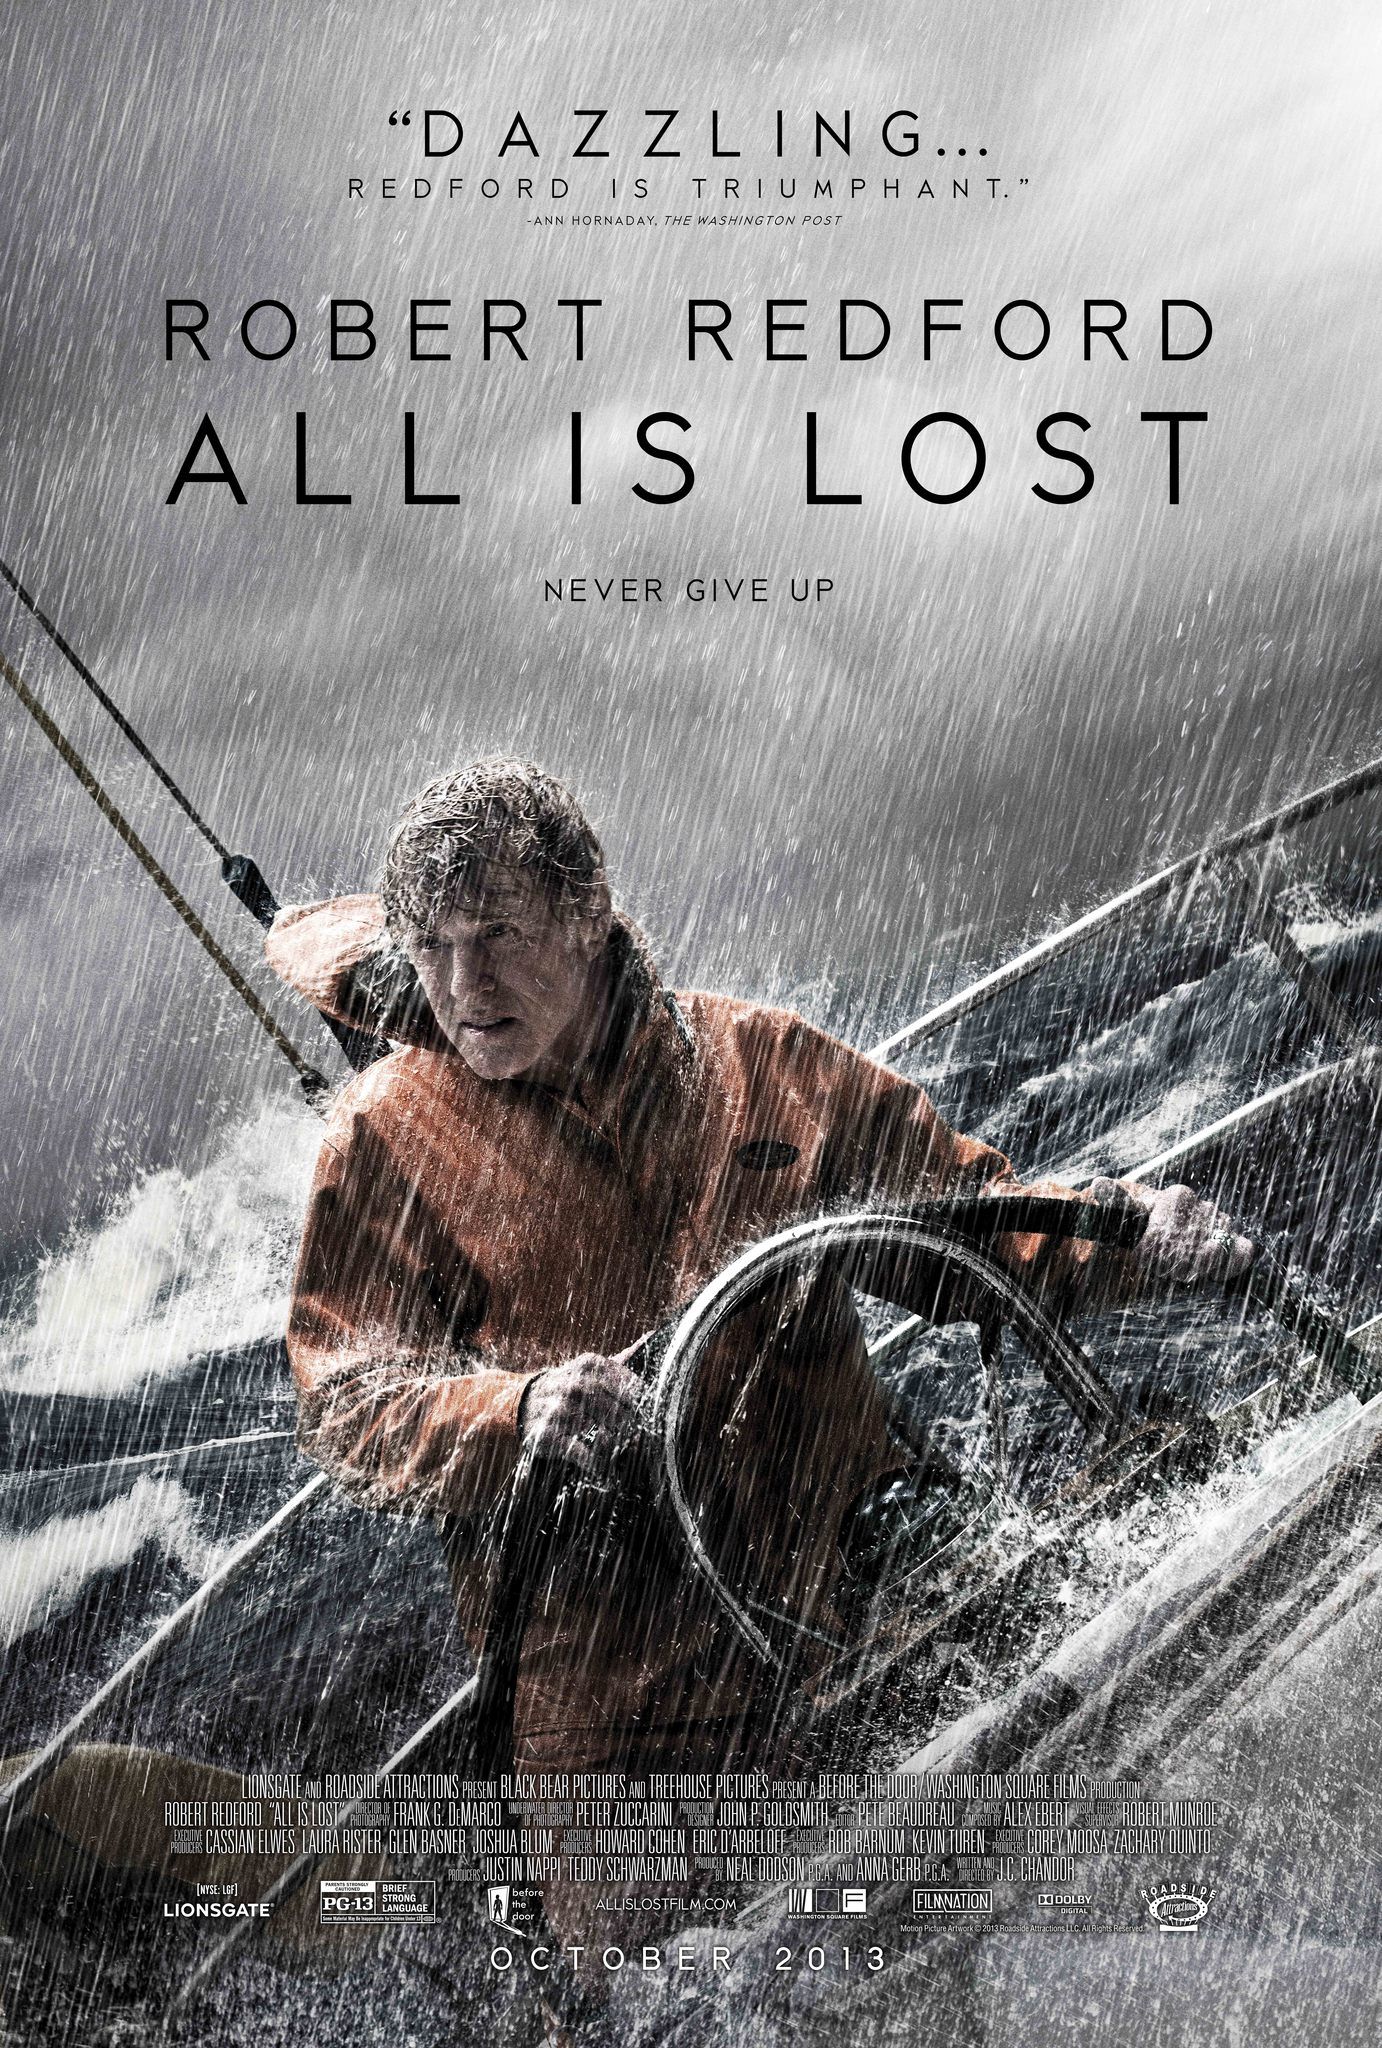 All Is Lost (2013) Hindi Dubbed